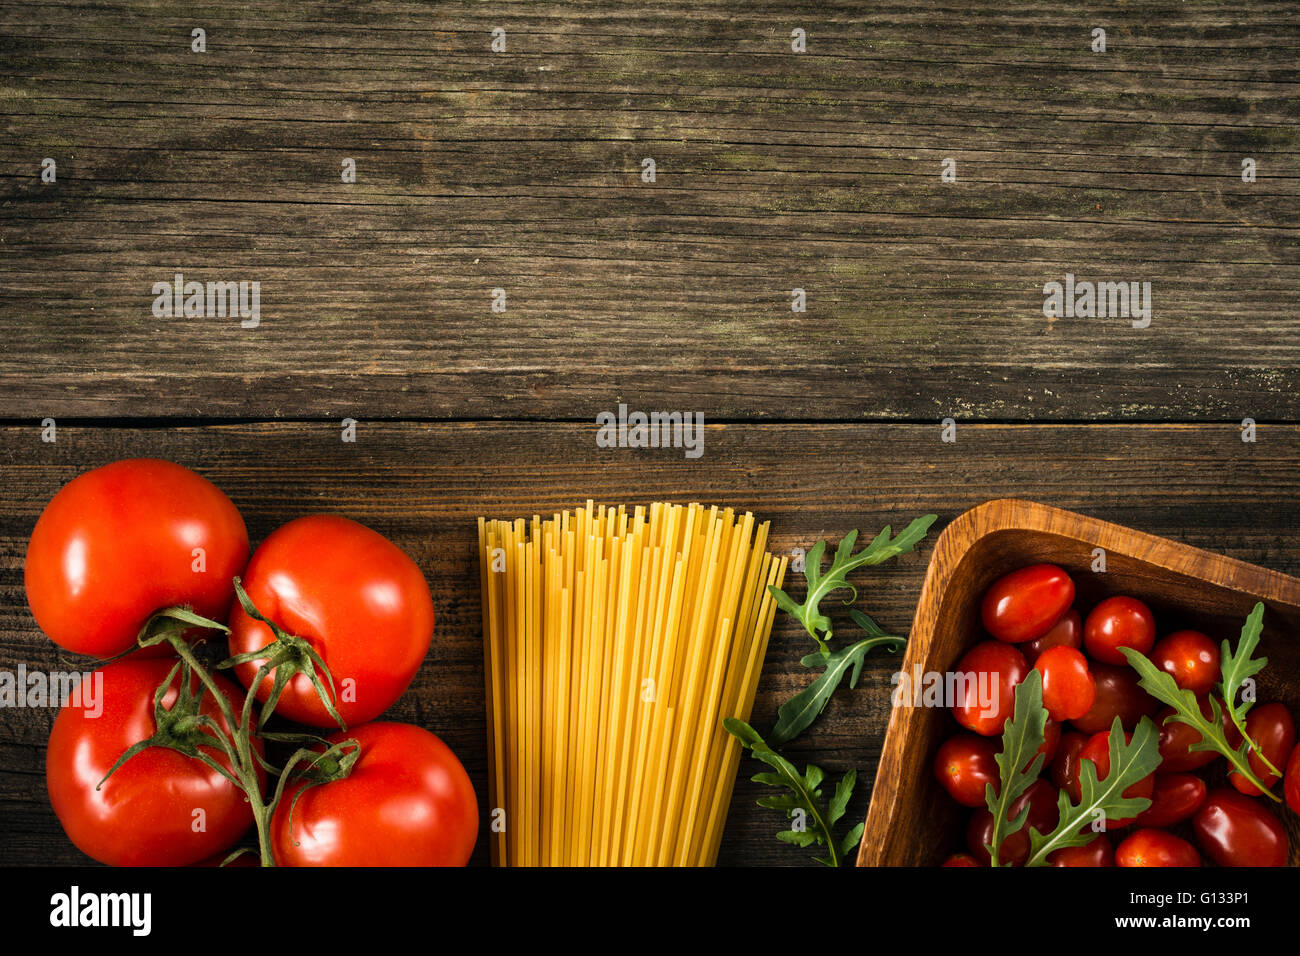 Italian food background / cooking ingredients background. Dry pasta, tomatoes, olive oil and salad leaves on wooden backdrop Stock Photo